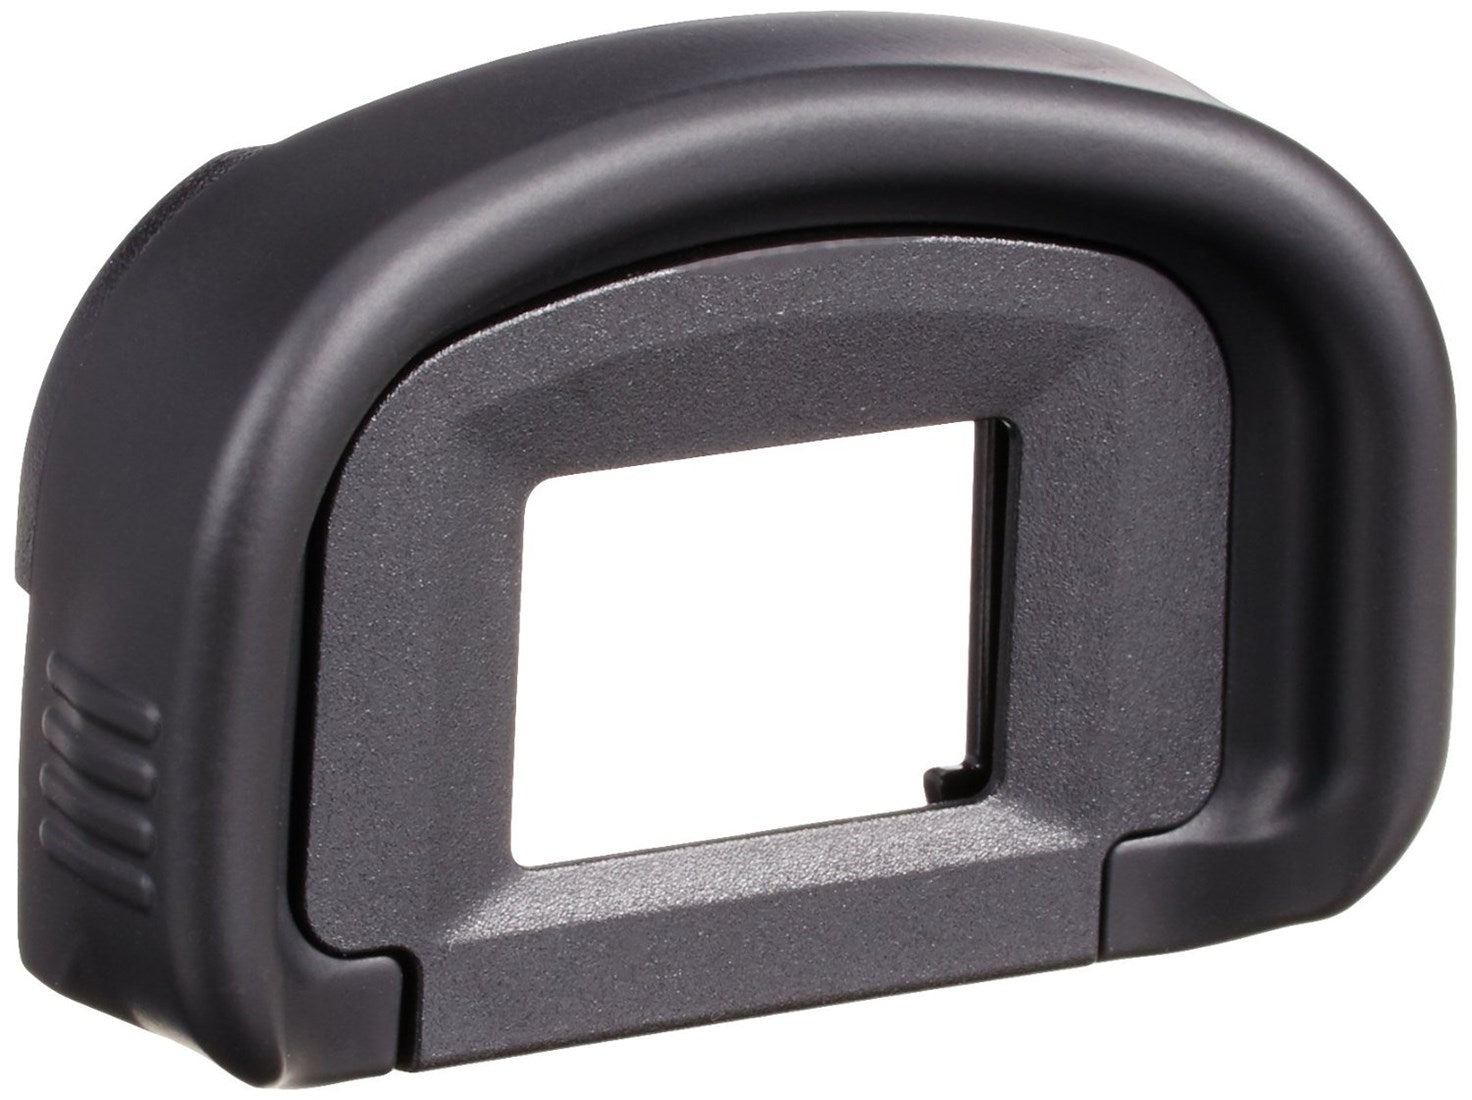 Canon EG Eyecup for EOS 1D IV, 1Ds III, 7D Cameras - Product Photo 1